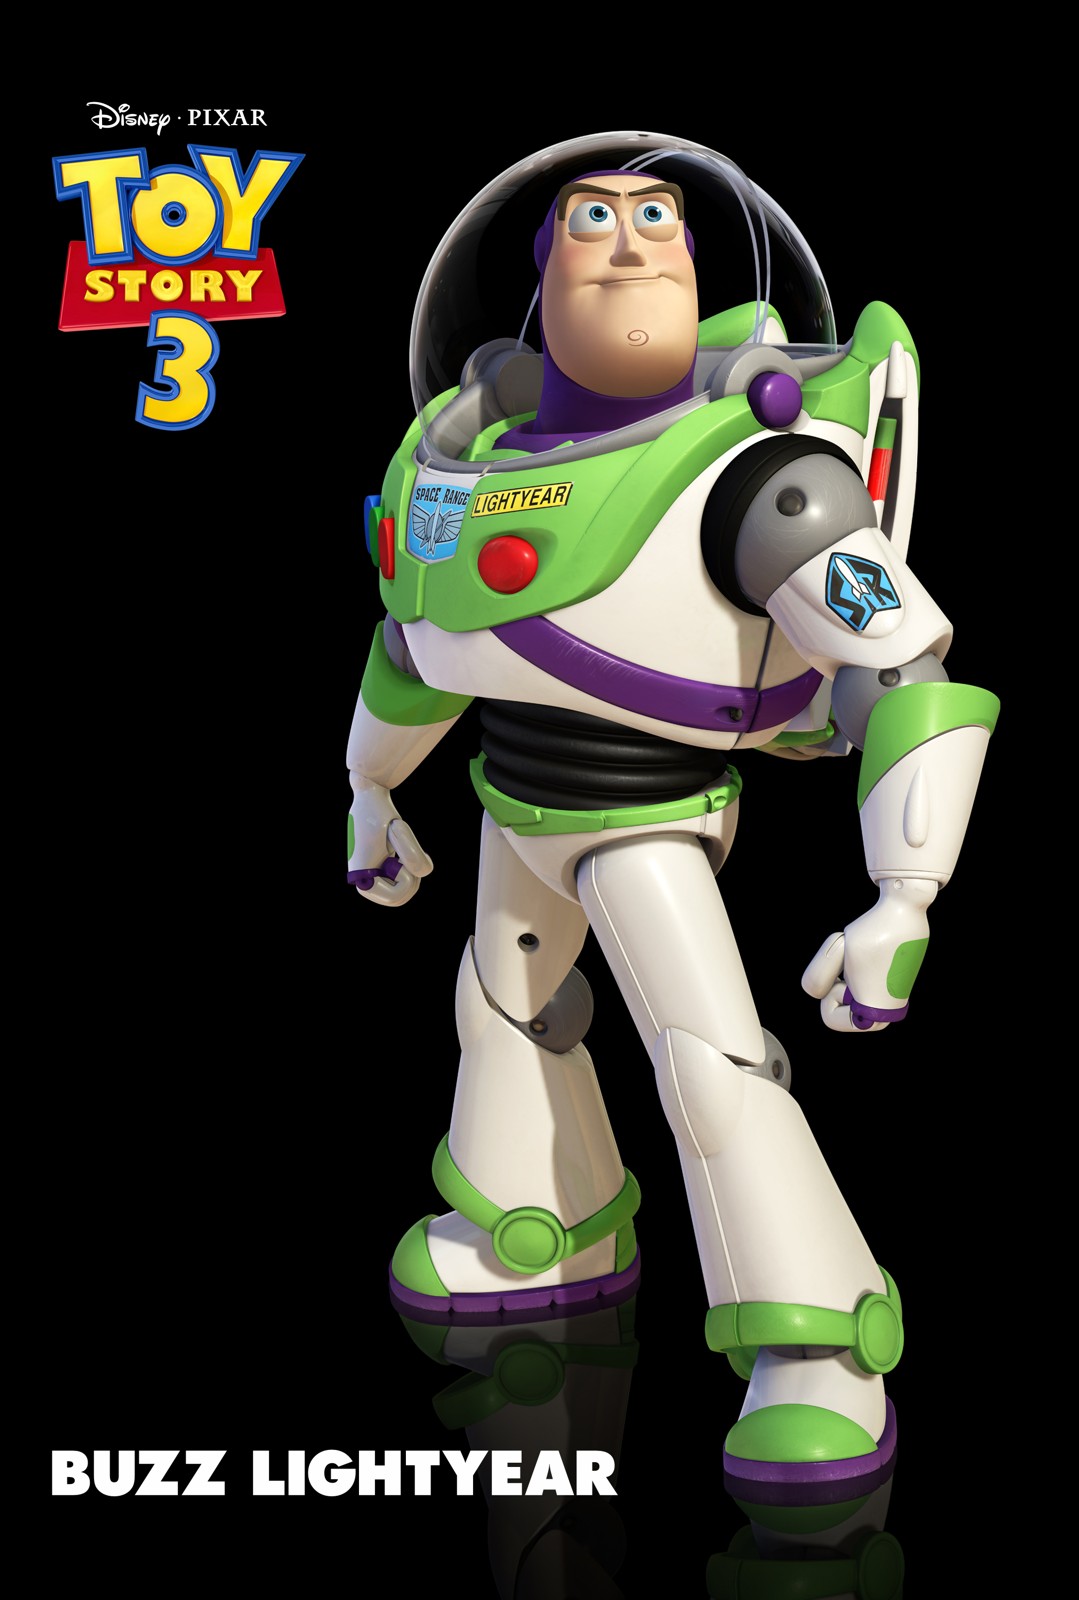 Toy Story 2 1999 Full Movie Free Download in 1080p HD